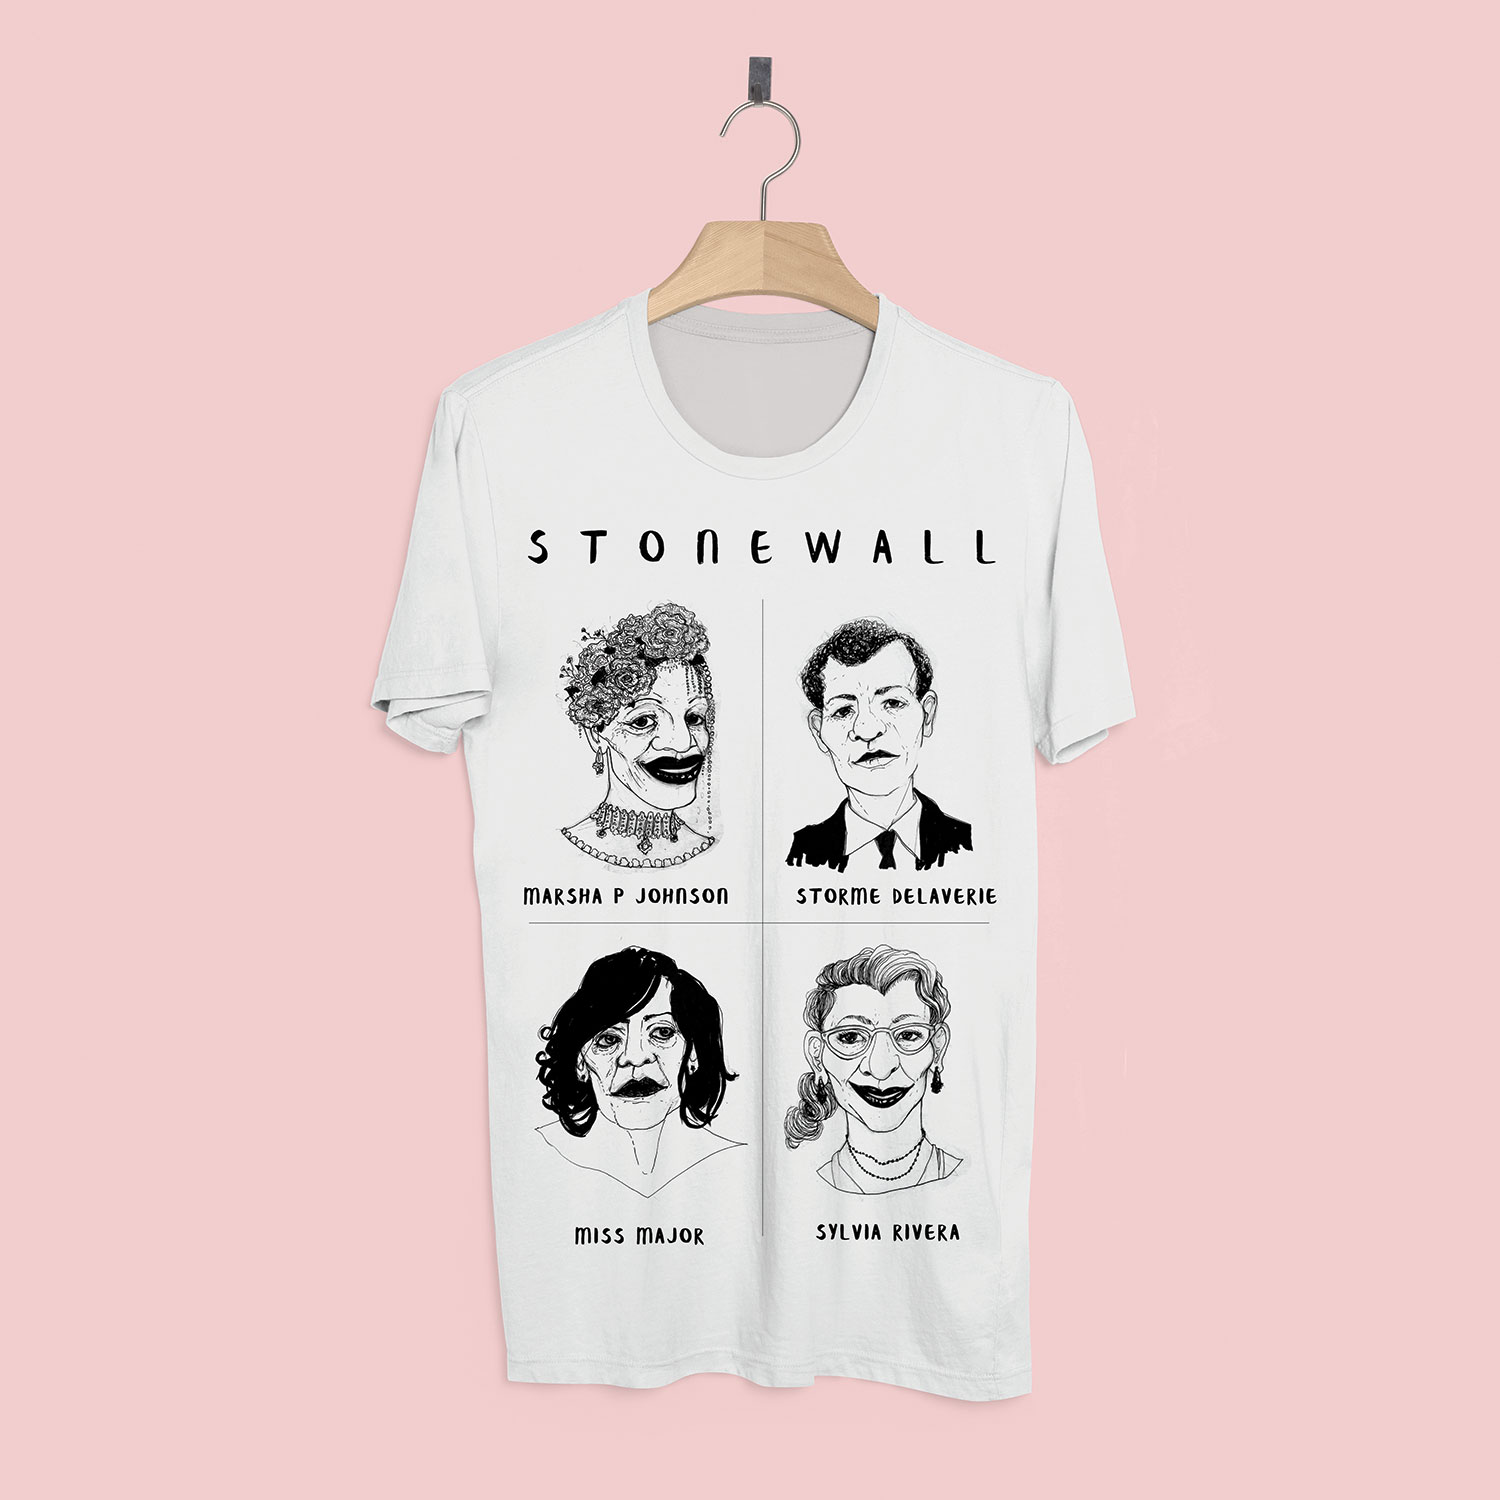 Stonewall-Liberators-for-the-Torch-Passer-Tee-Project_Mel-Paisley-2018.jpg